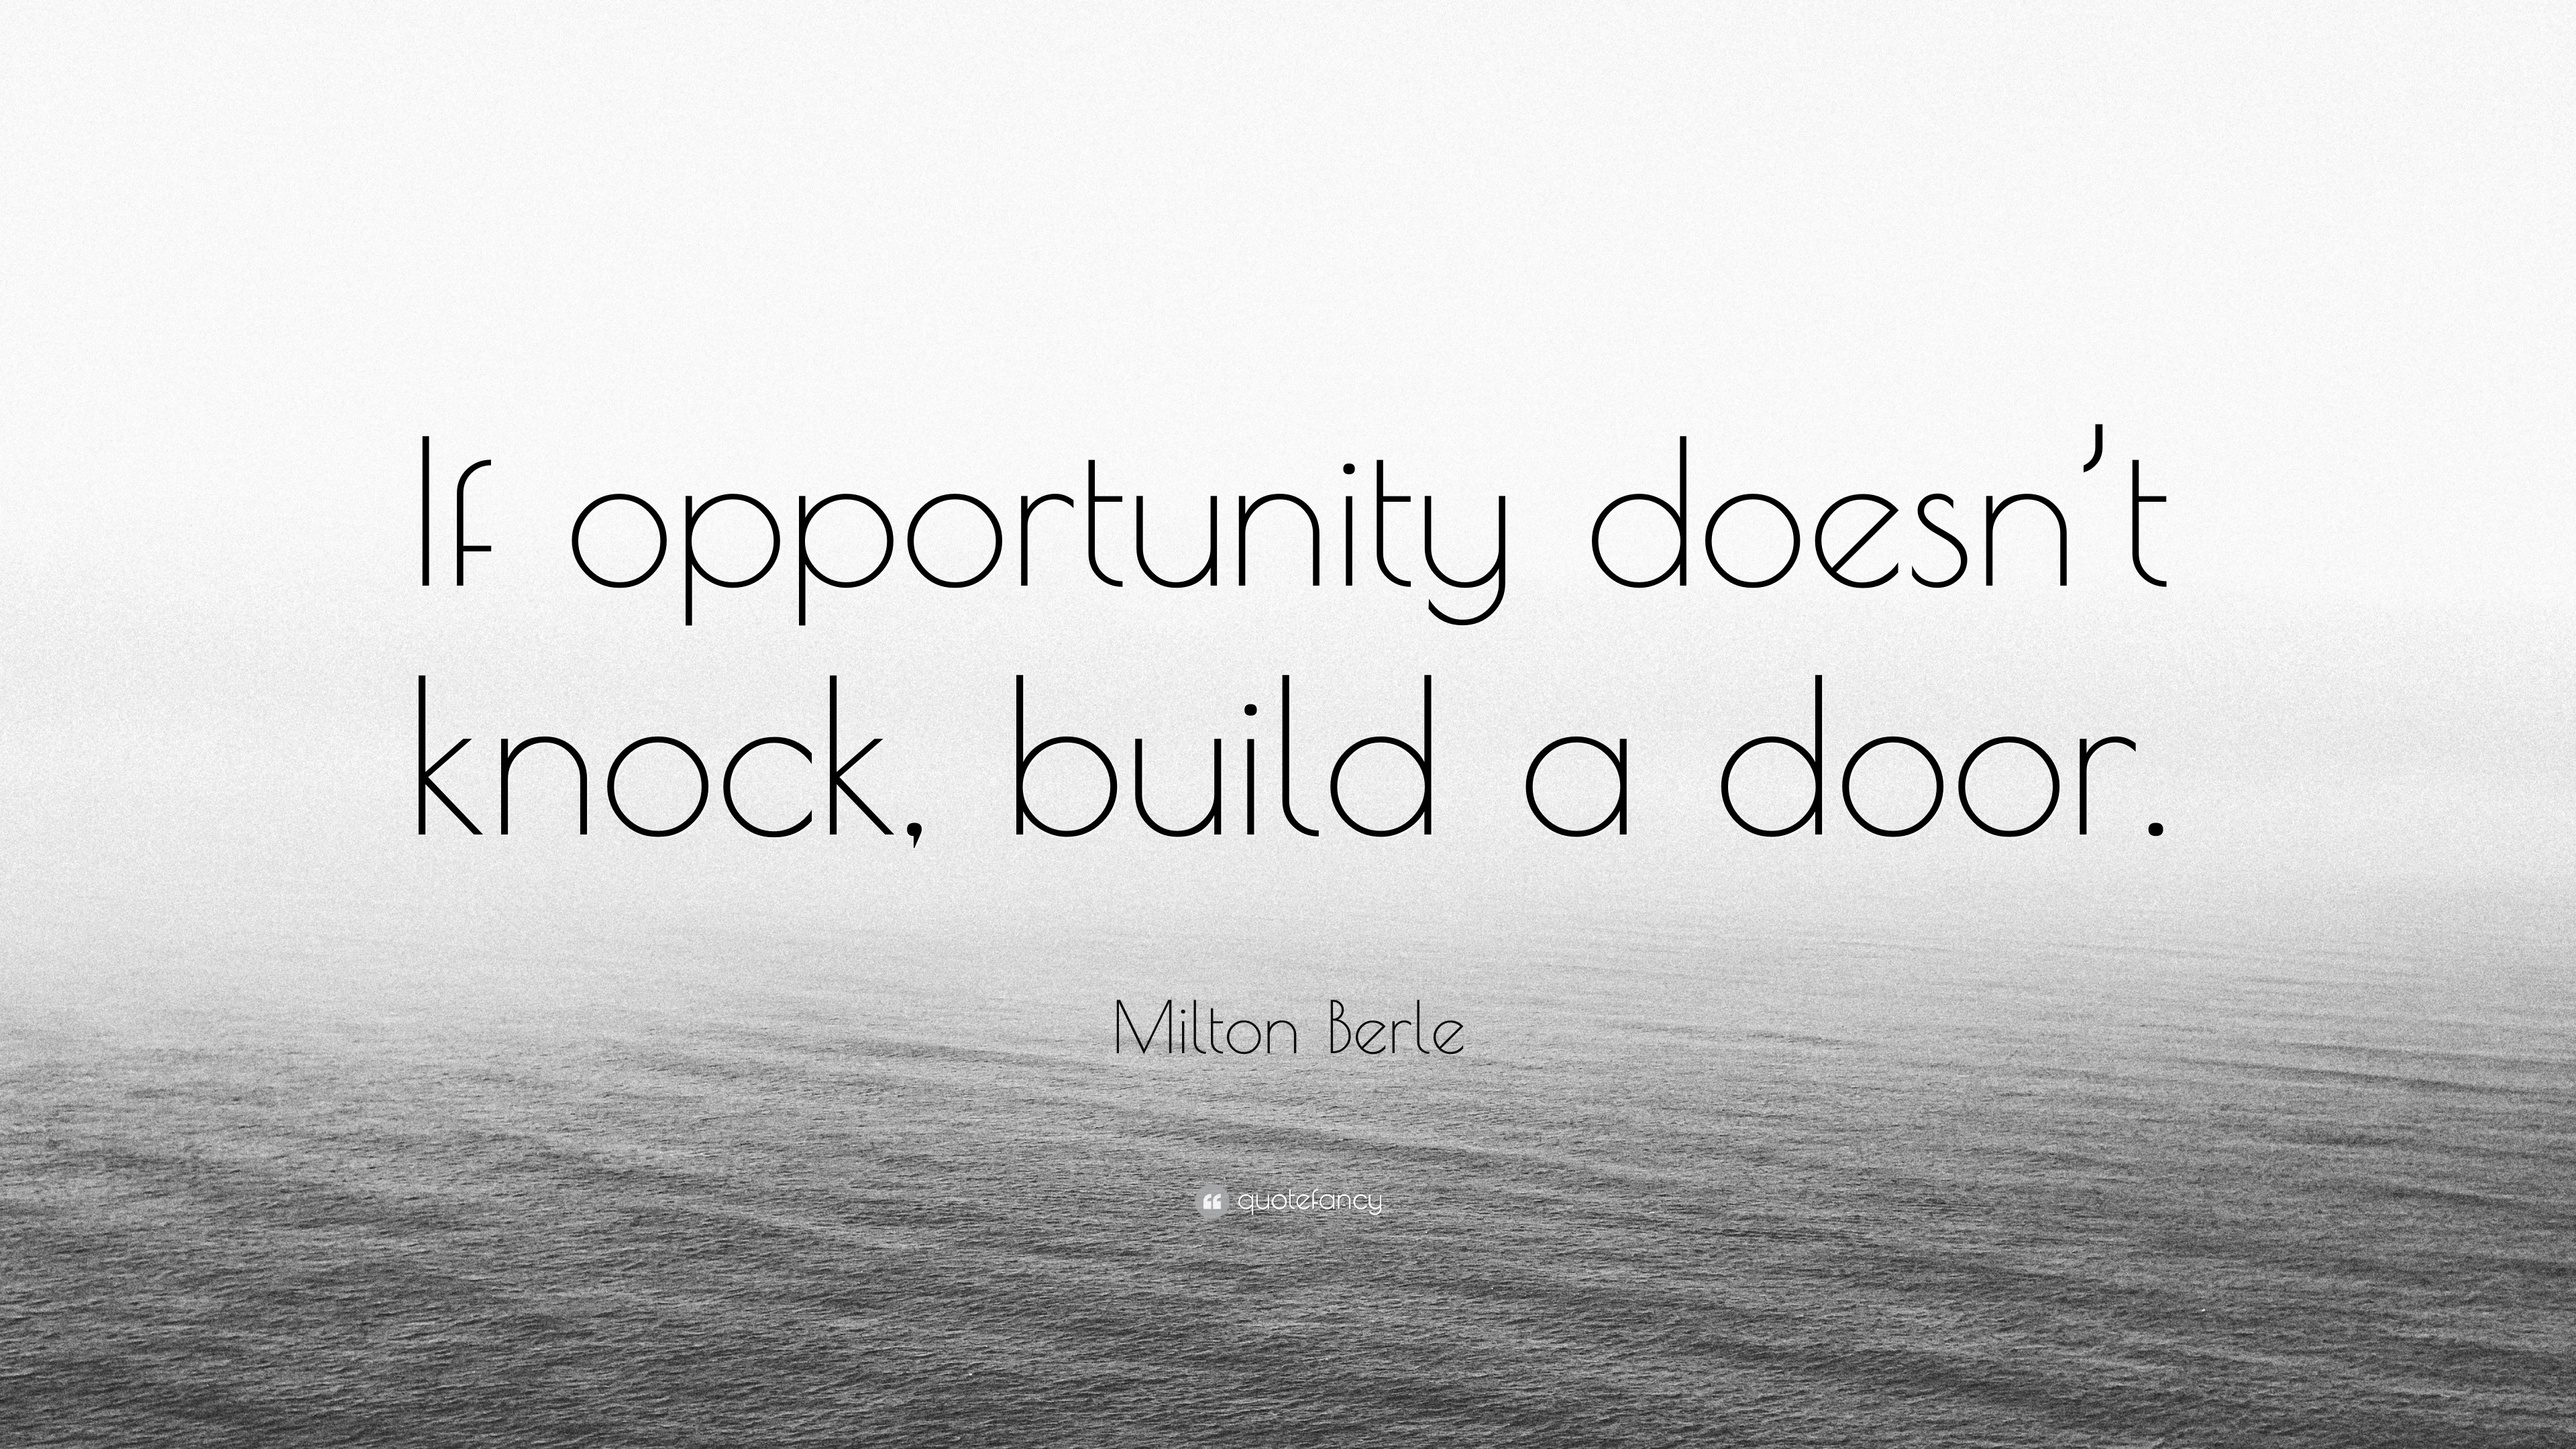 Milton Berle Quote: “If opportunity doesn't knock, build a door.”